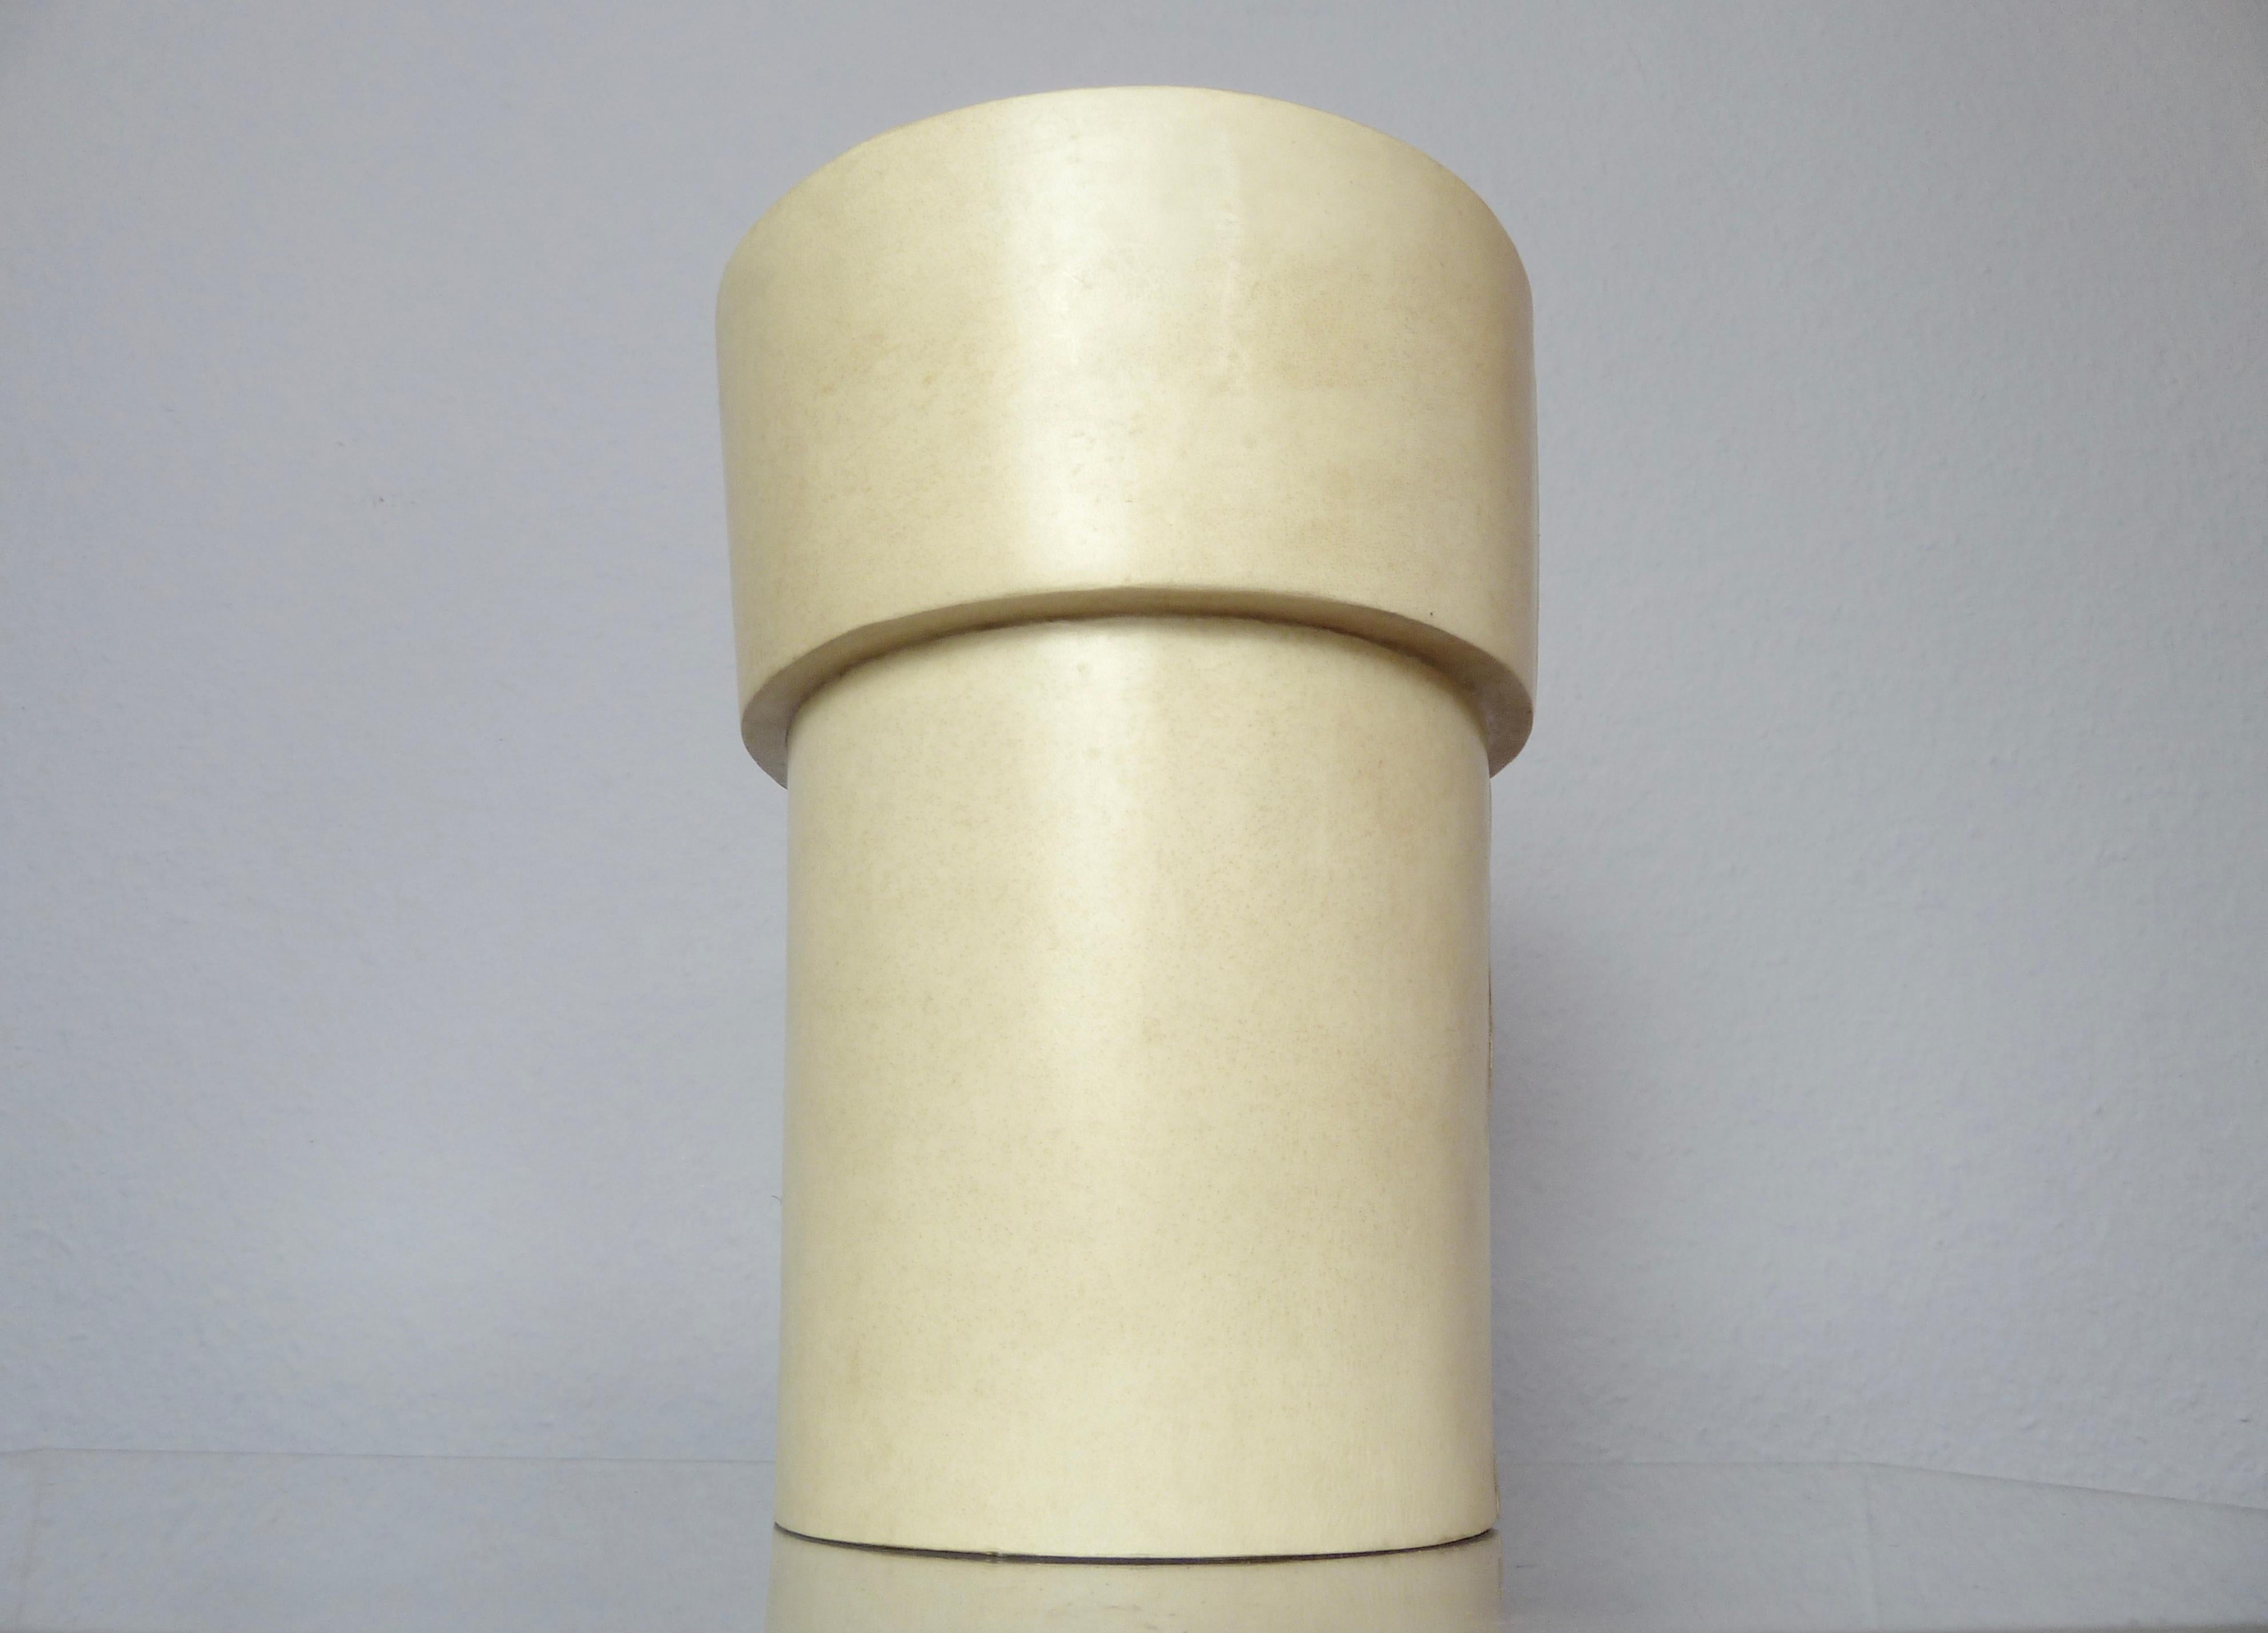 A beautiful and rare 1990s early Artdeco style Vase from R&Y Augousti, Paris.
This item is not pre-owned, it originates from a NOS /new old stock of a Design Gallery in Germany.


Material: Handcrafted parchment leather pieces over a paper mâché